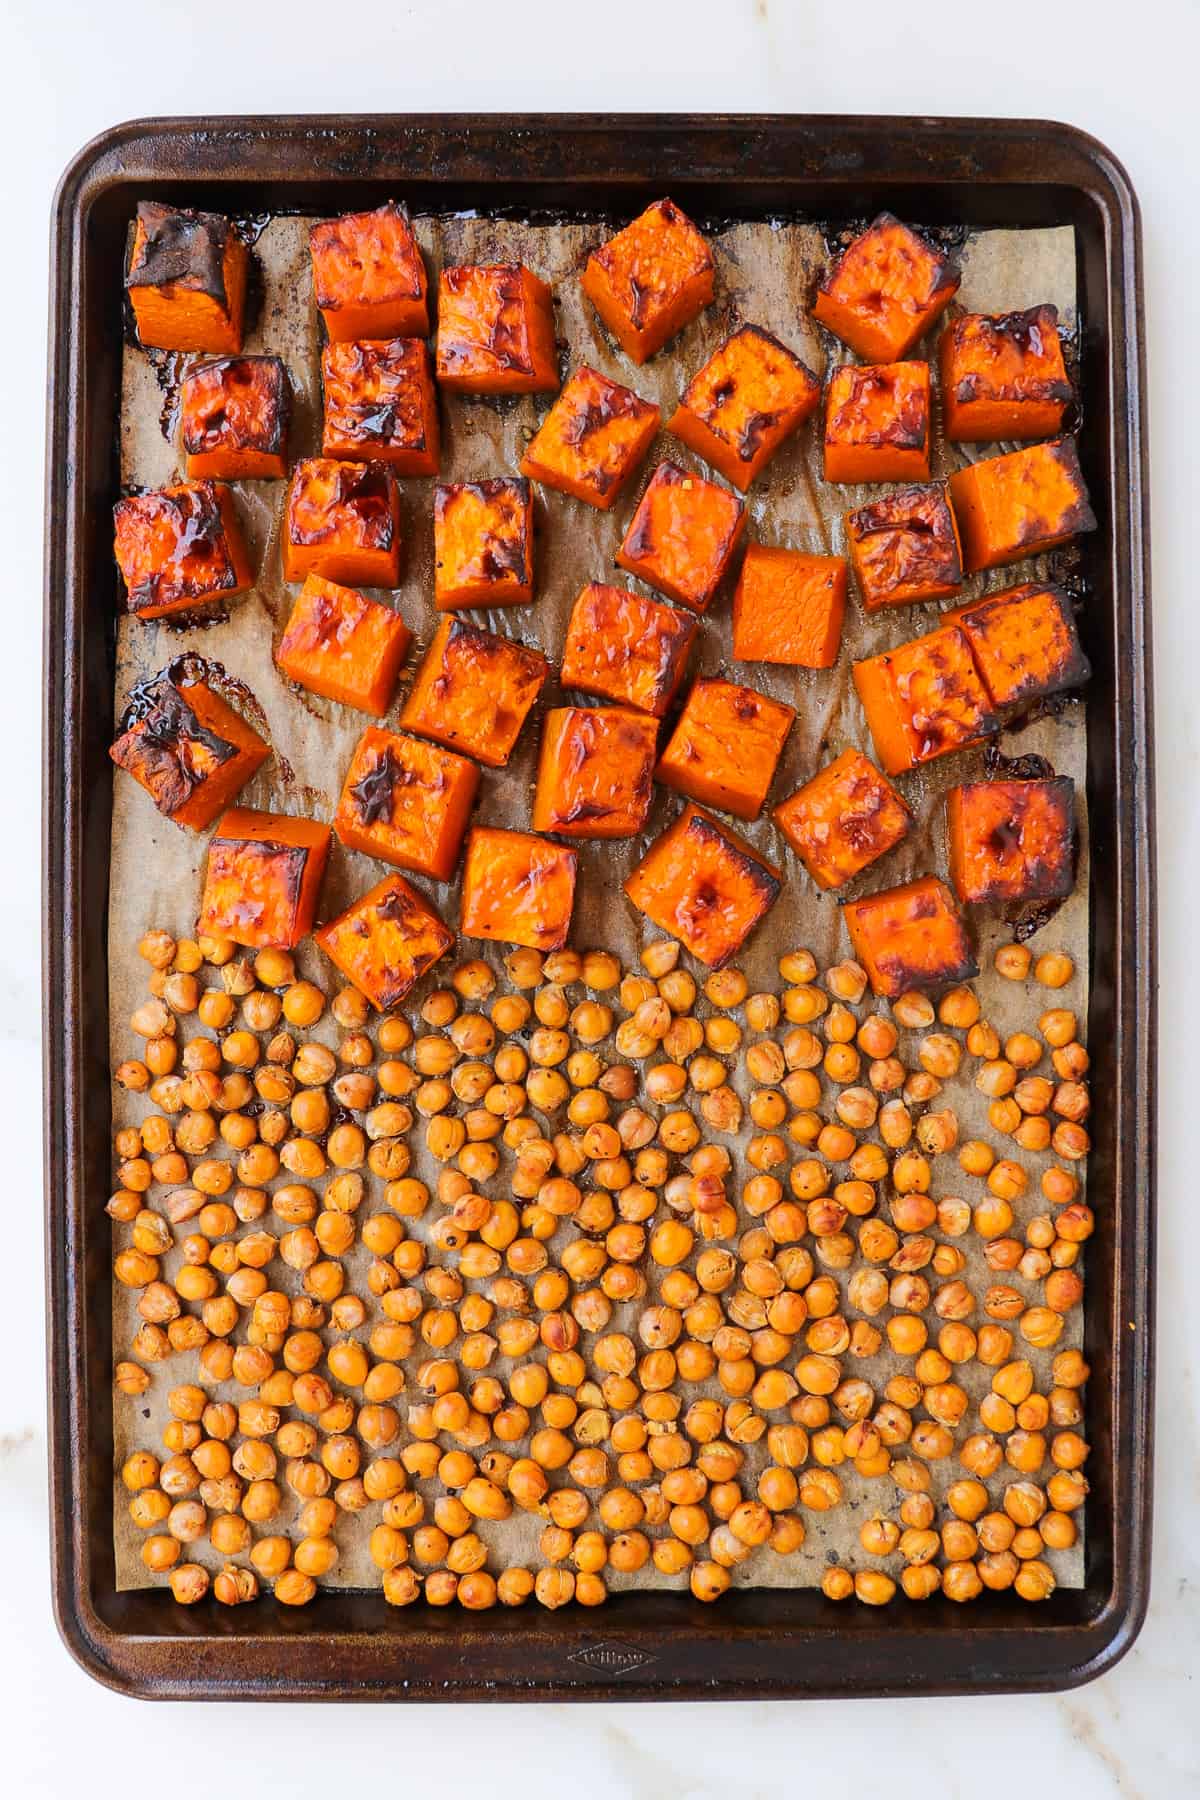 Roasted pumpkin and chickpeas on a baking tray.